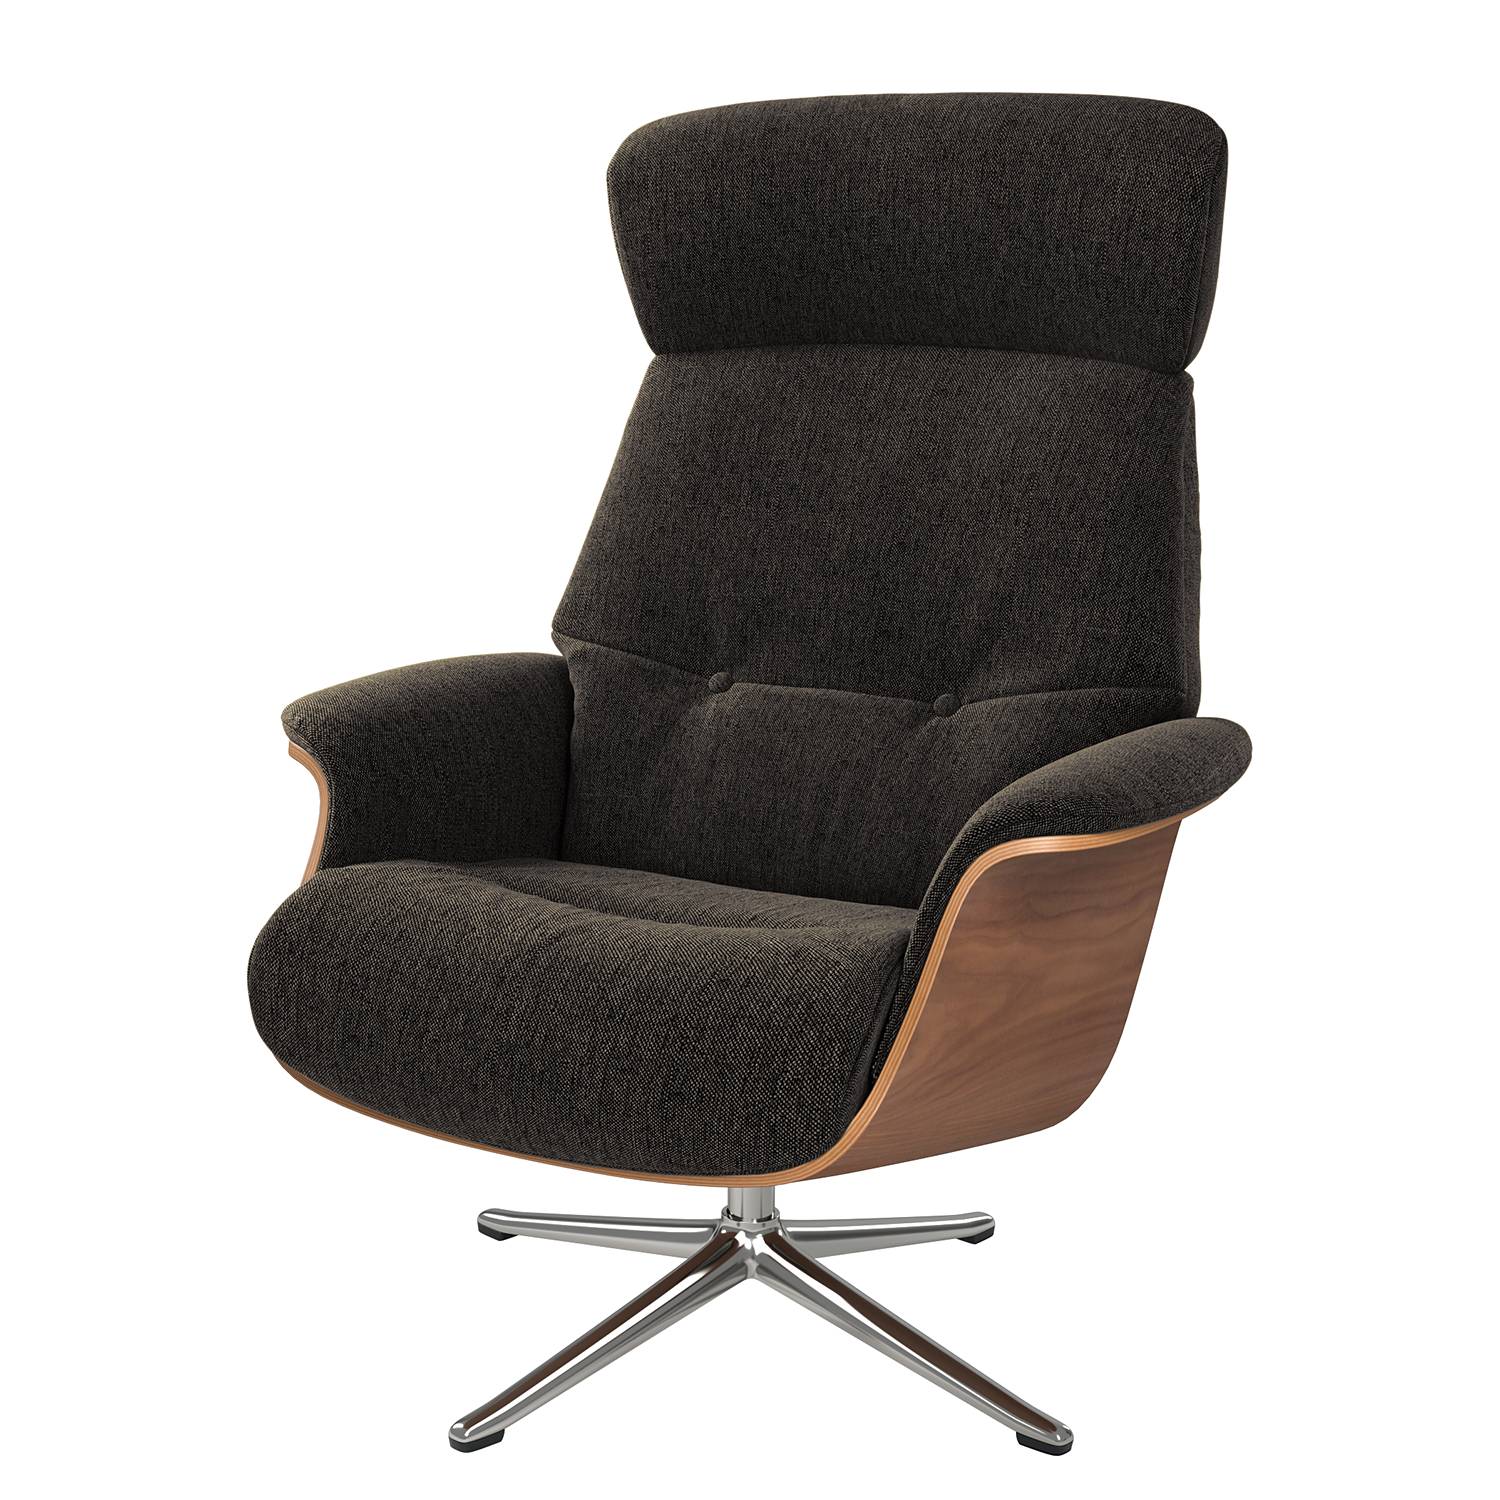 Image of Fauteuil relax Anderson IV 000000001000131264